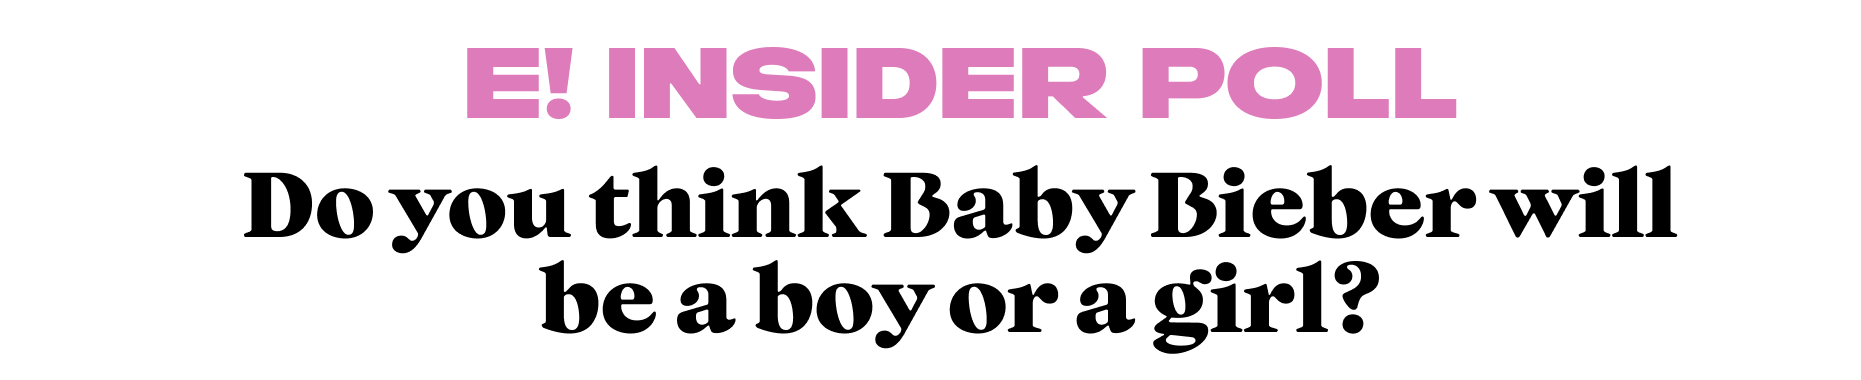 Do you think Baby Bieber will be a boy or a girl?